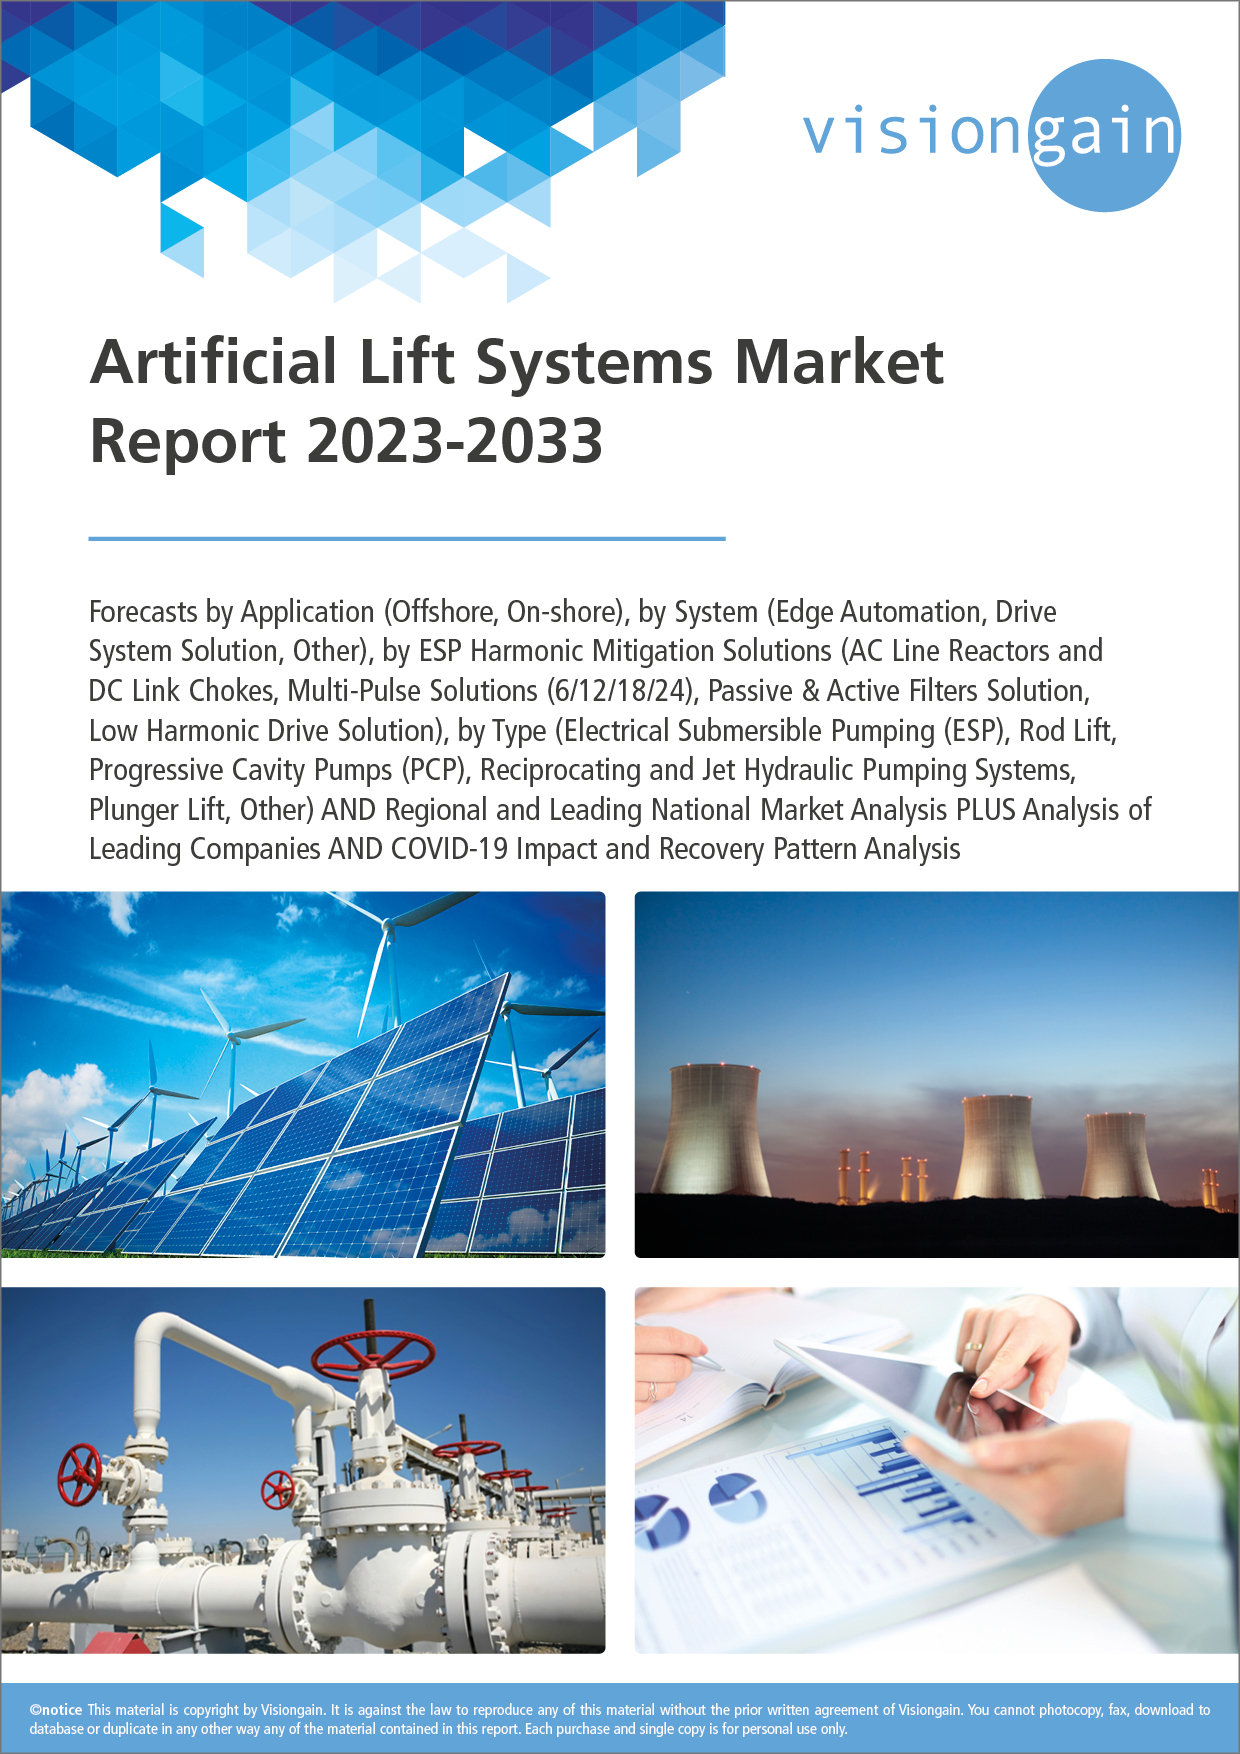 Artificial Lift Systems Market Report 2023-2033